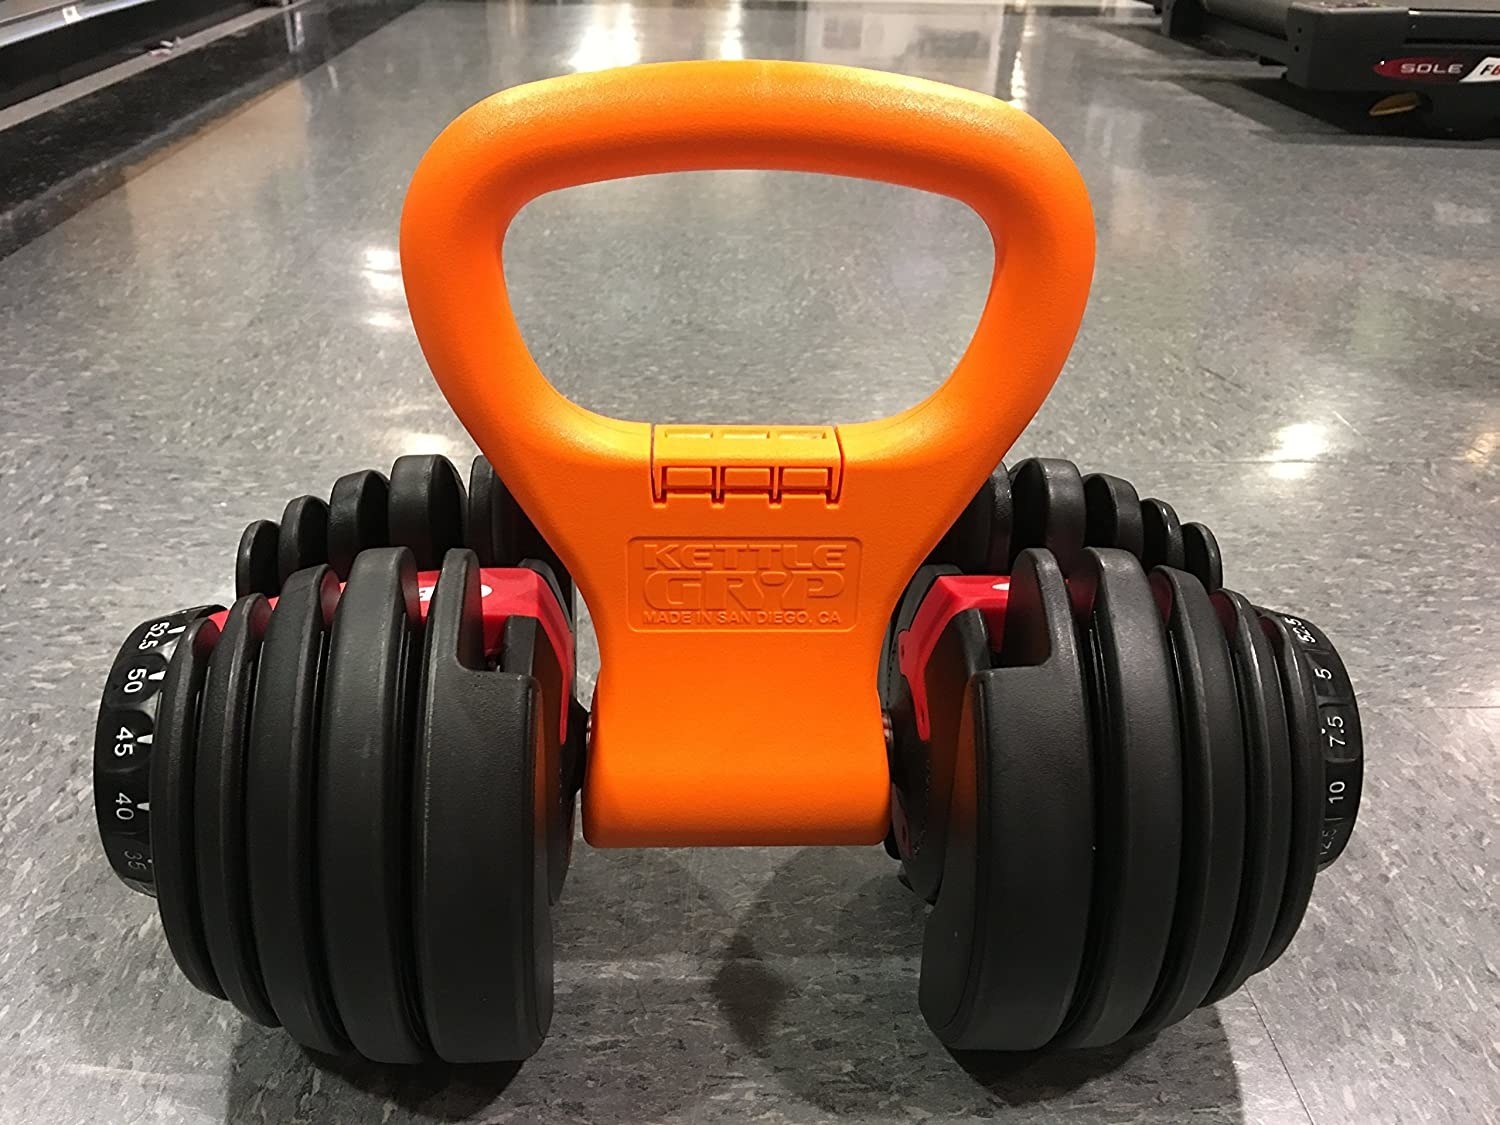 A dumbell with the clamp attached to its bar